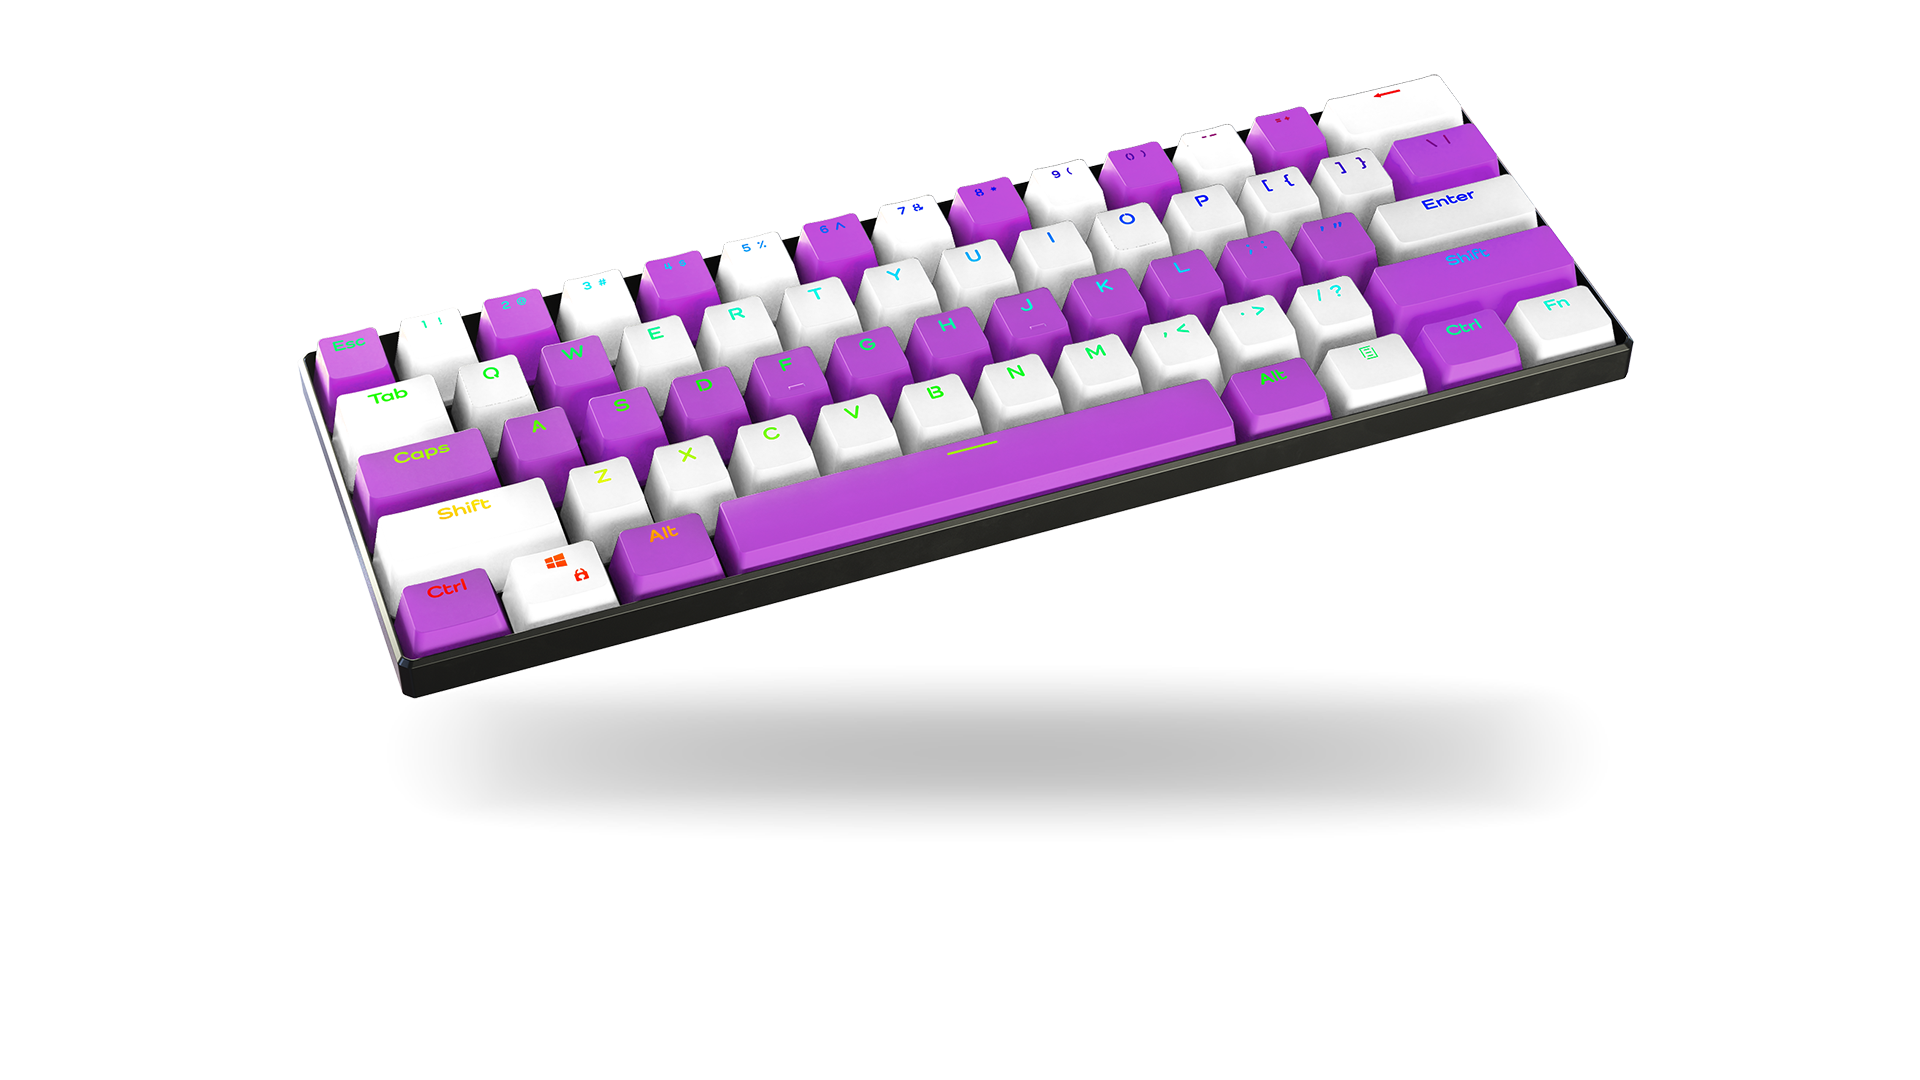 grapes of wrath - AltCustomsKeyboards